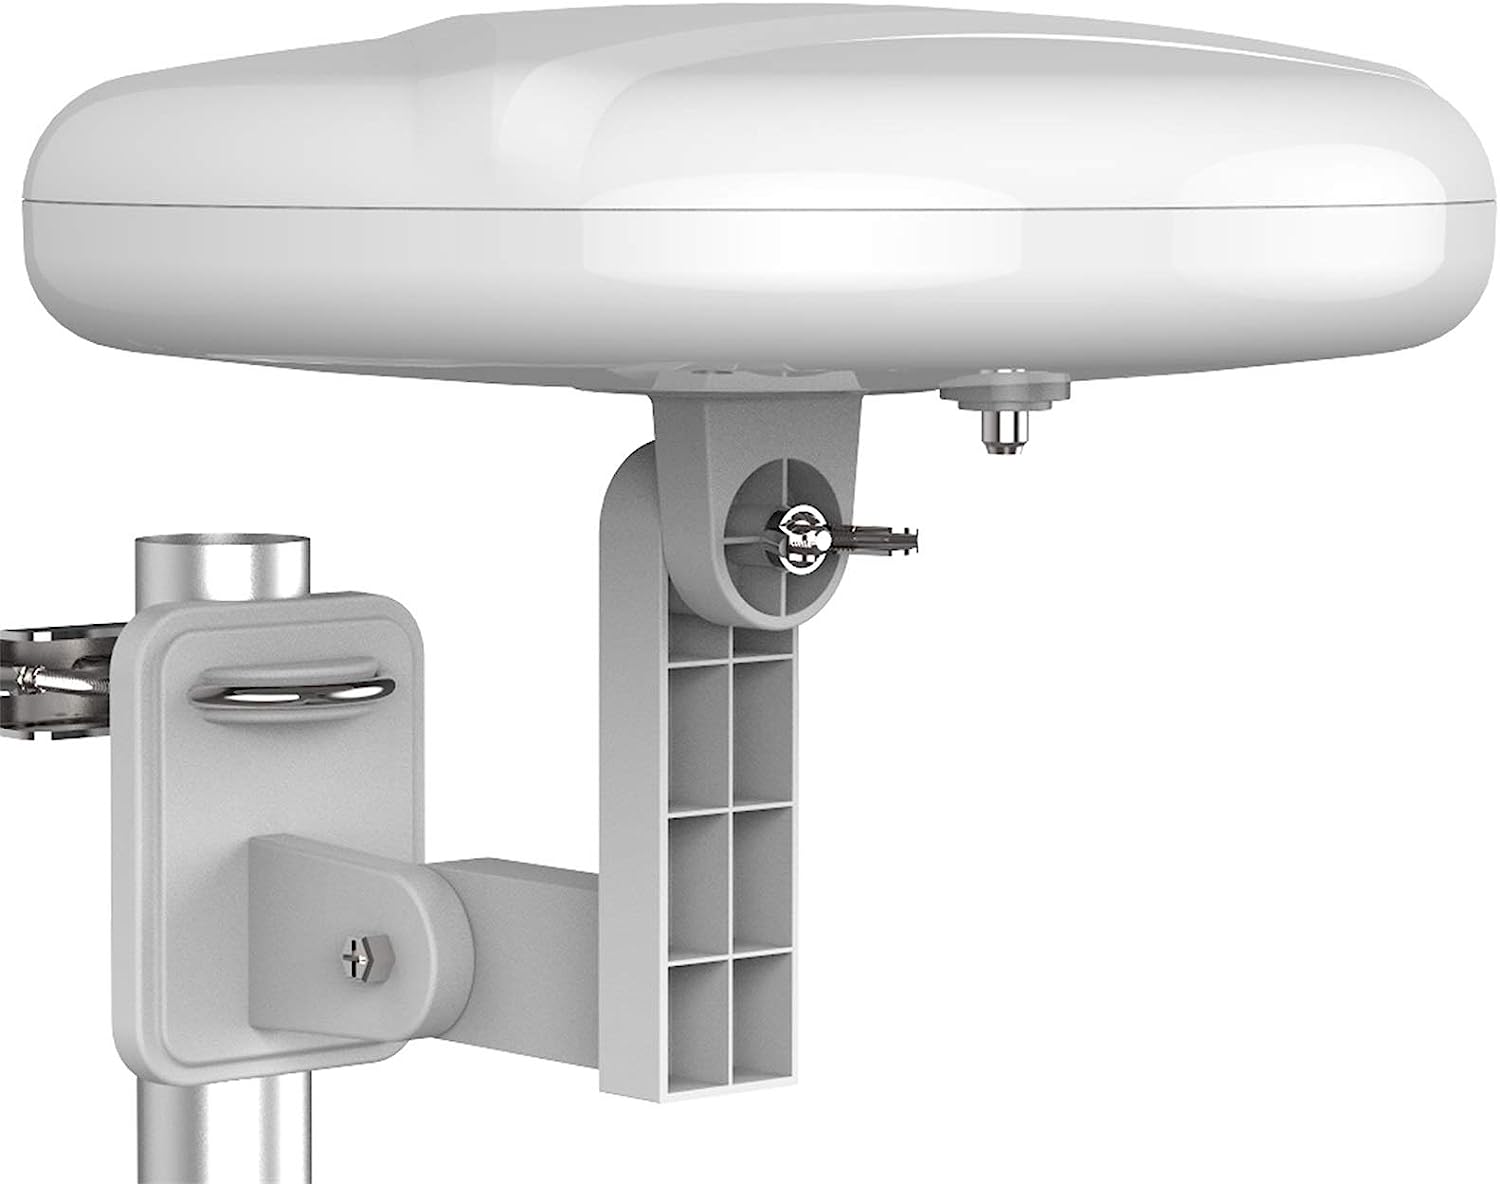 1 by one Outdoor TV Antenna 360° Omni-Directional [...]